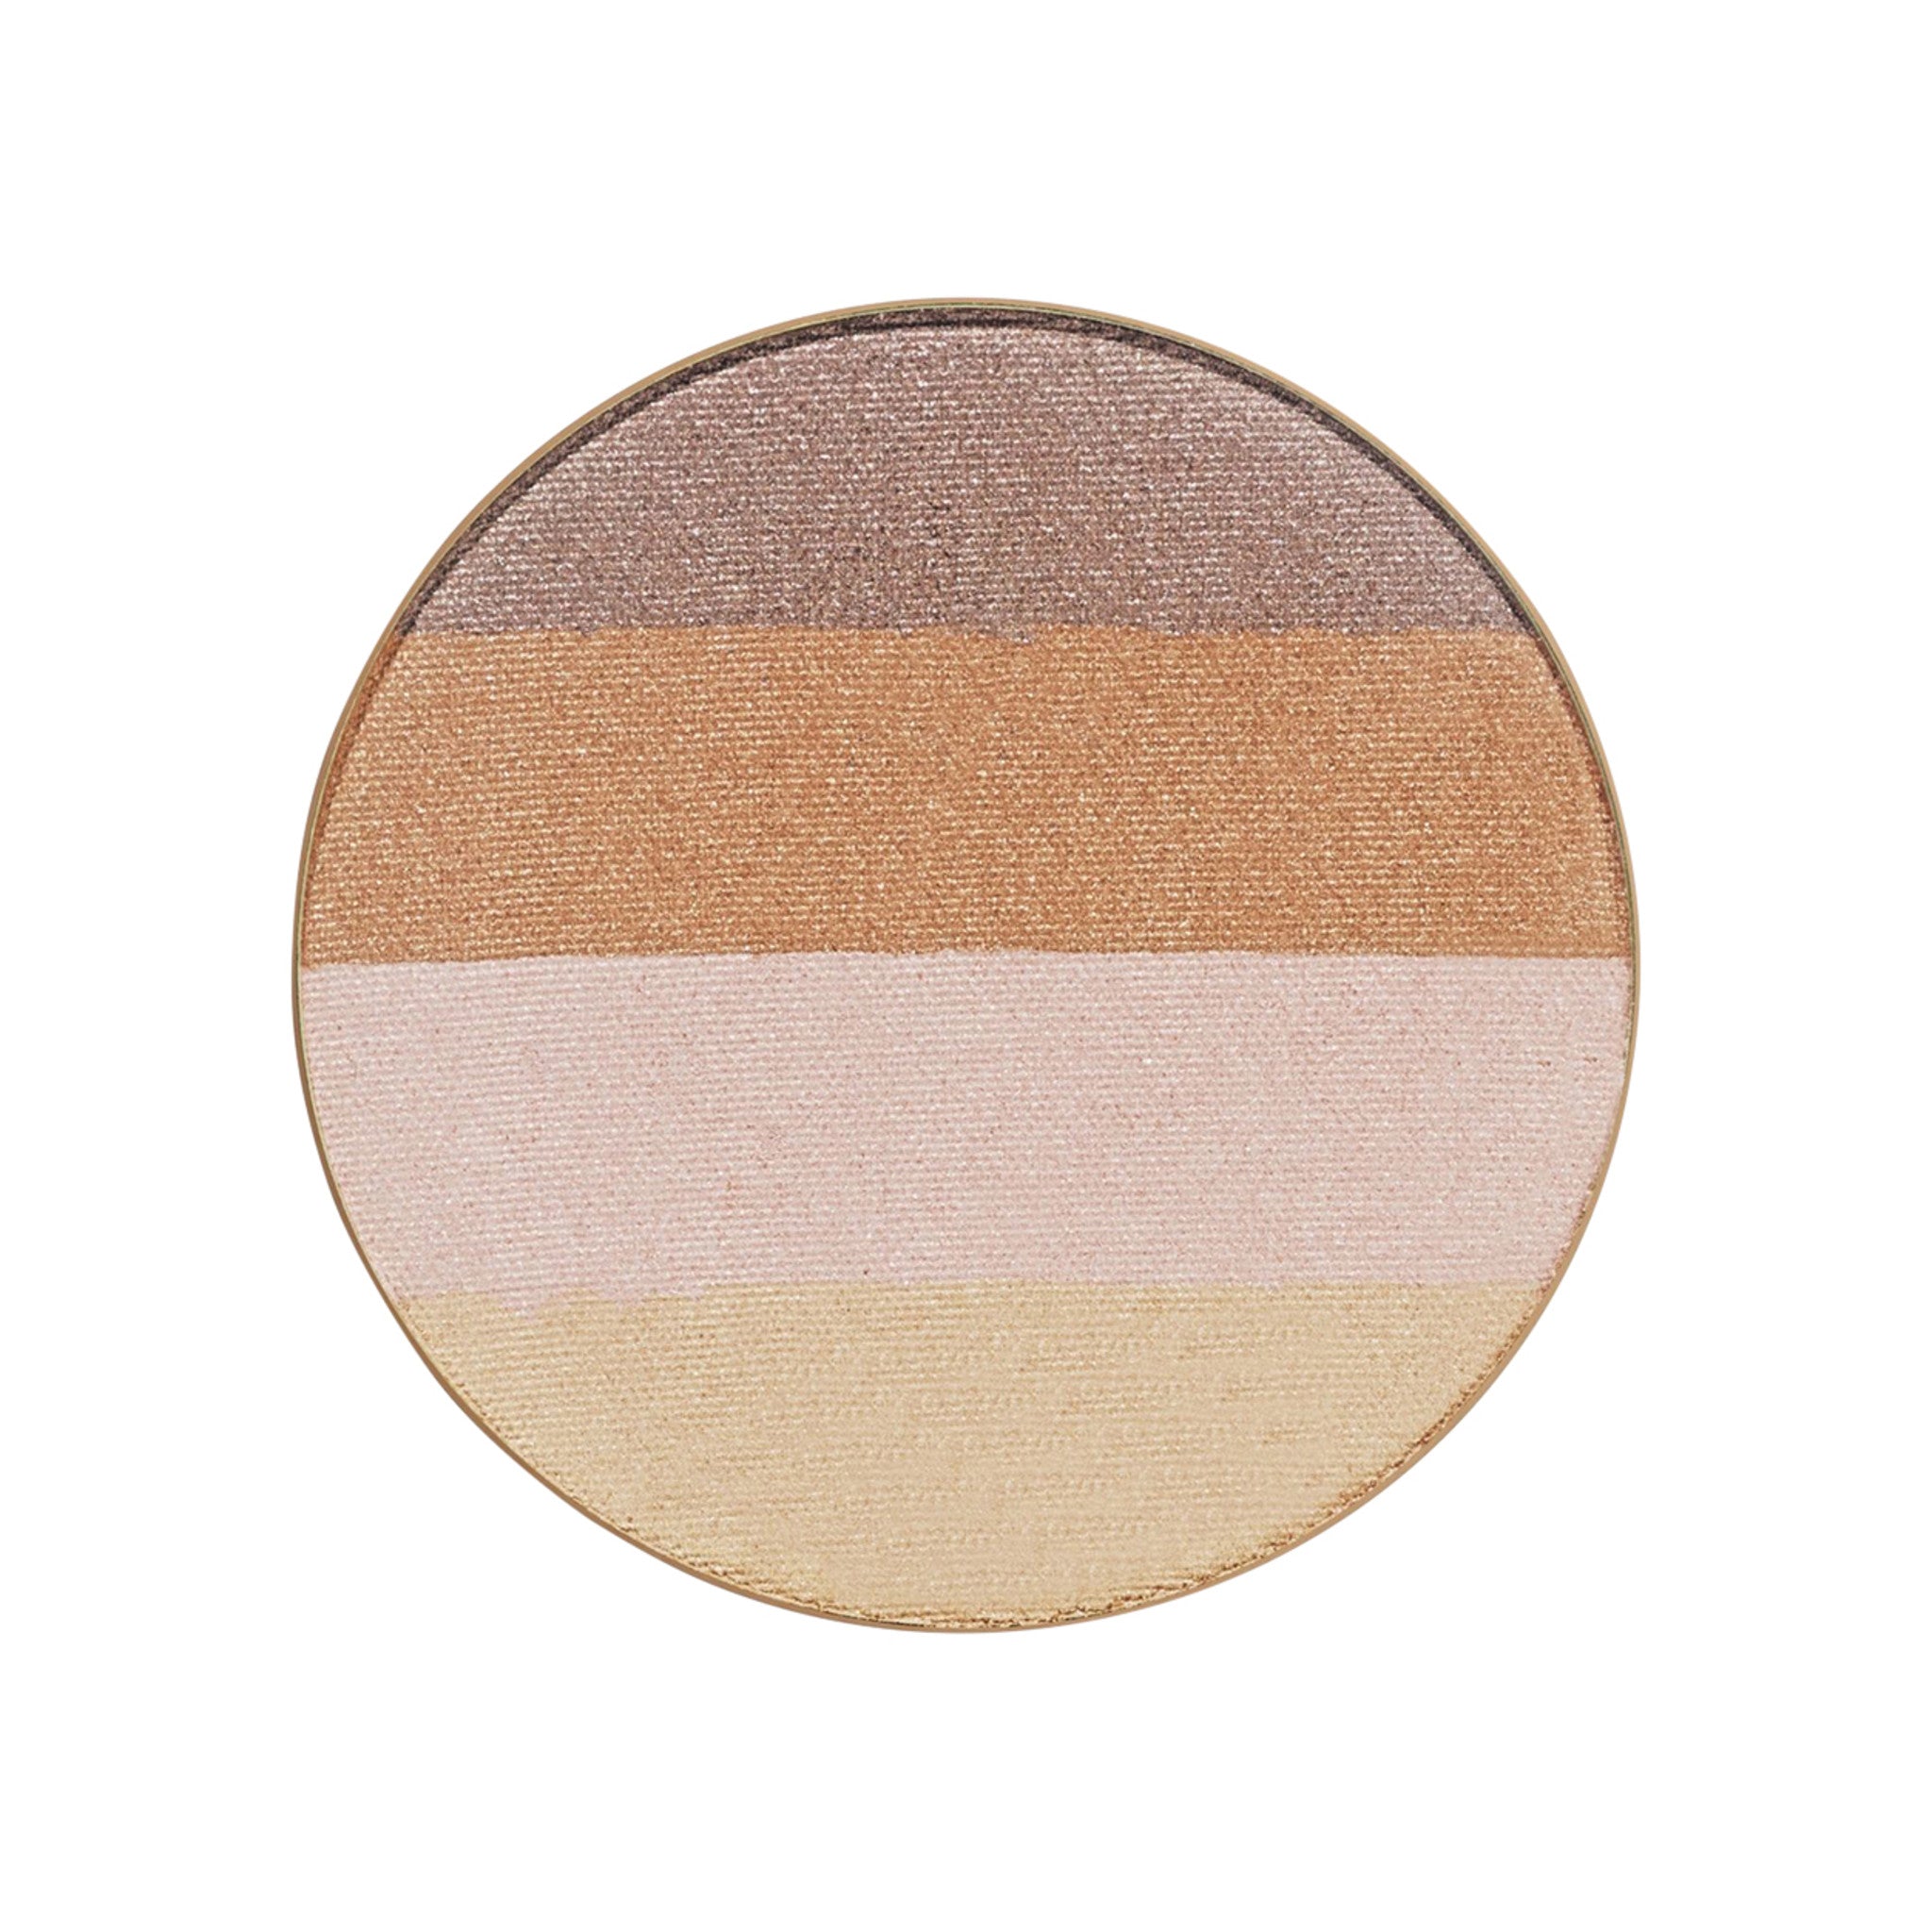 Jane Iredale Bronzer Color/Shade variant: Moonglow main image.